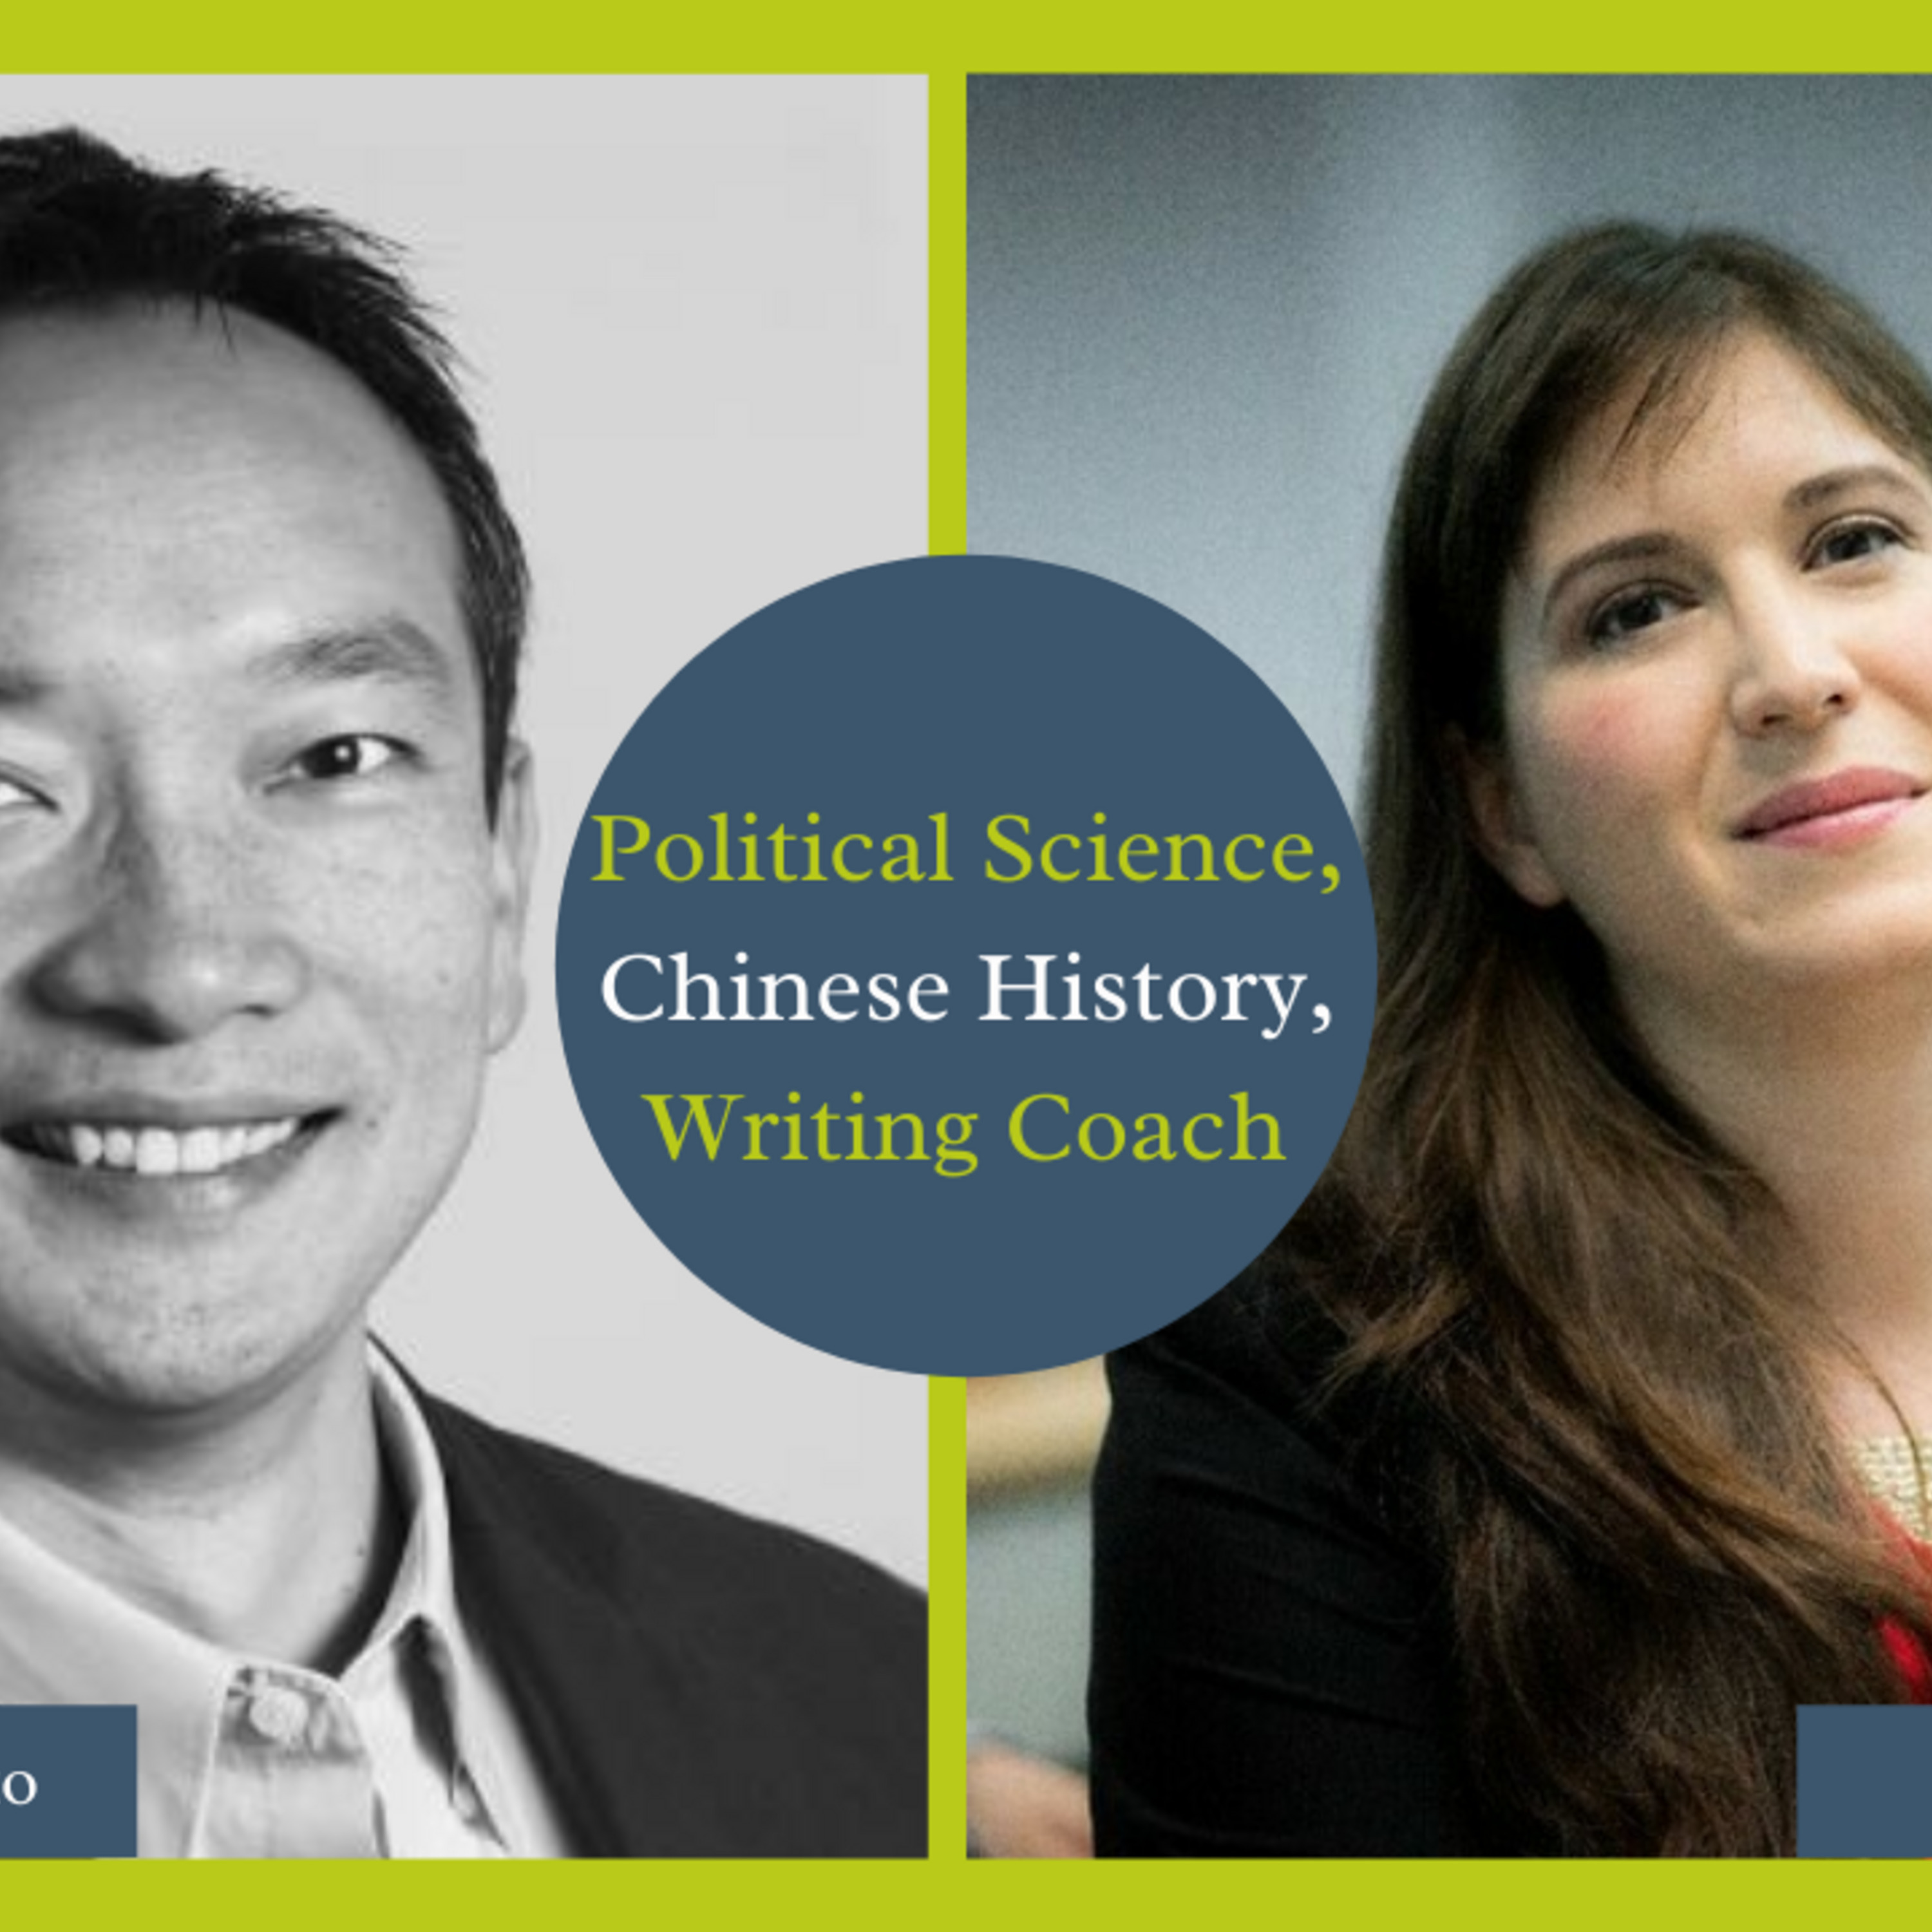 Political Science, Chinese History, and Writing Coach - Lisa Pfau LP-001 MENTOR CORNER